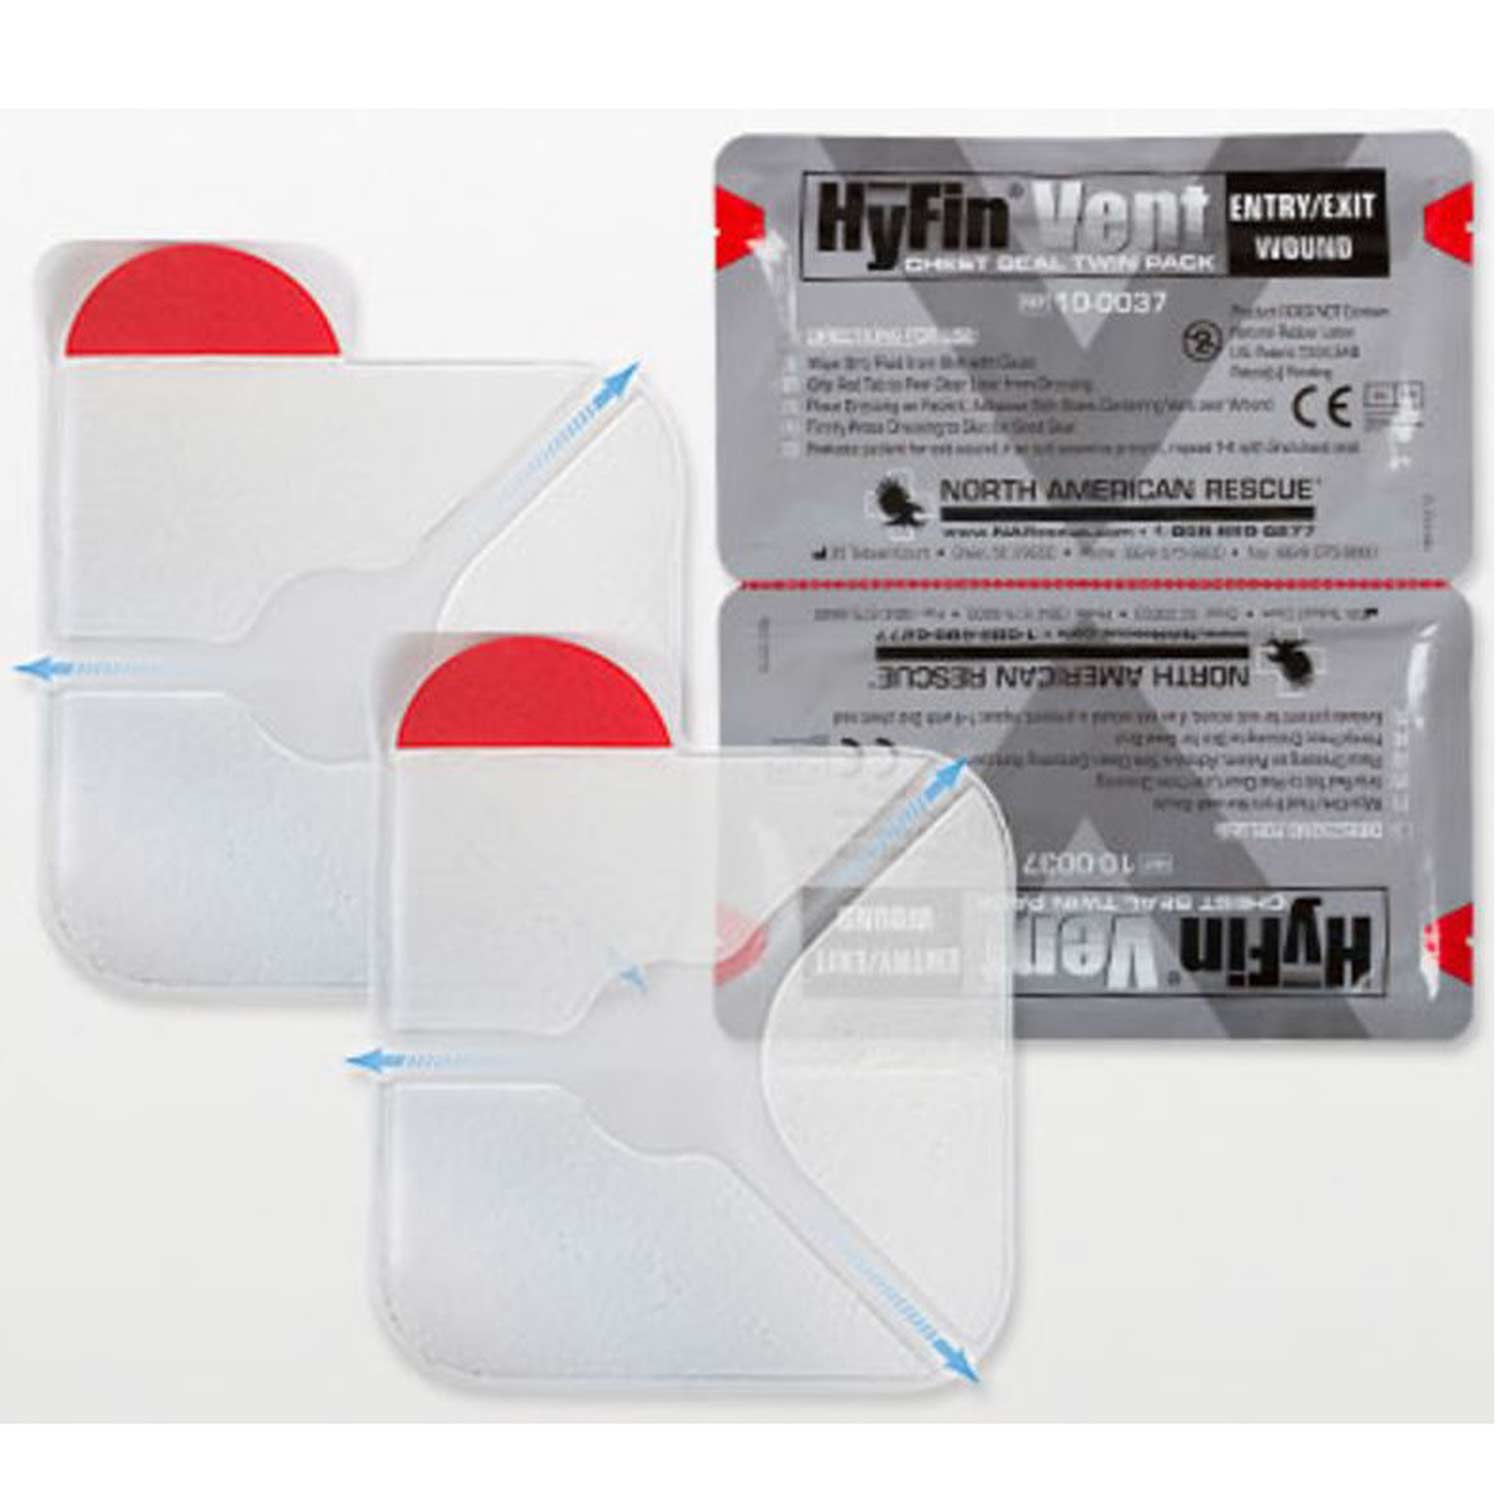 North American Rescue Hyfin Chest Seal (Twin Pack)